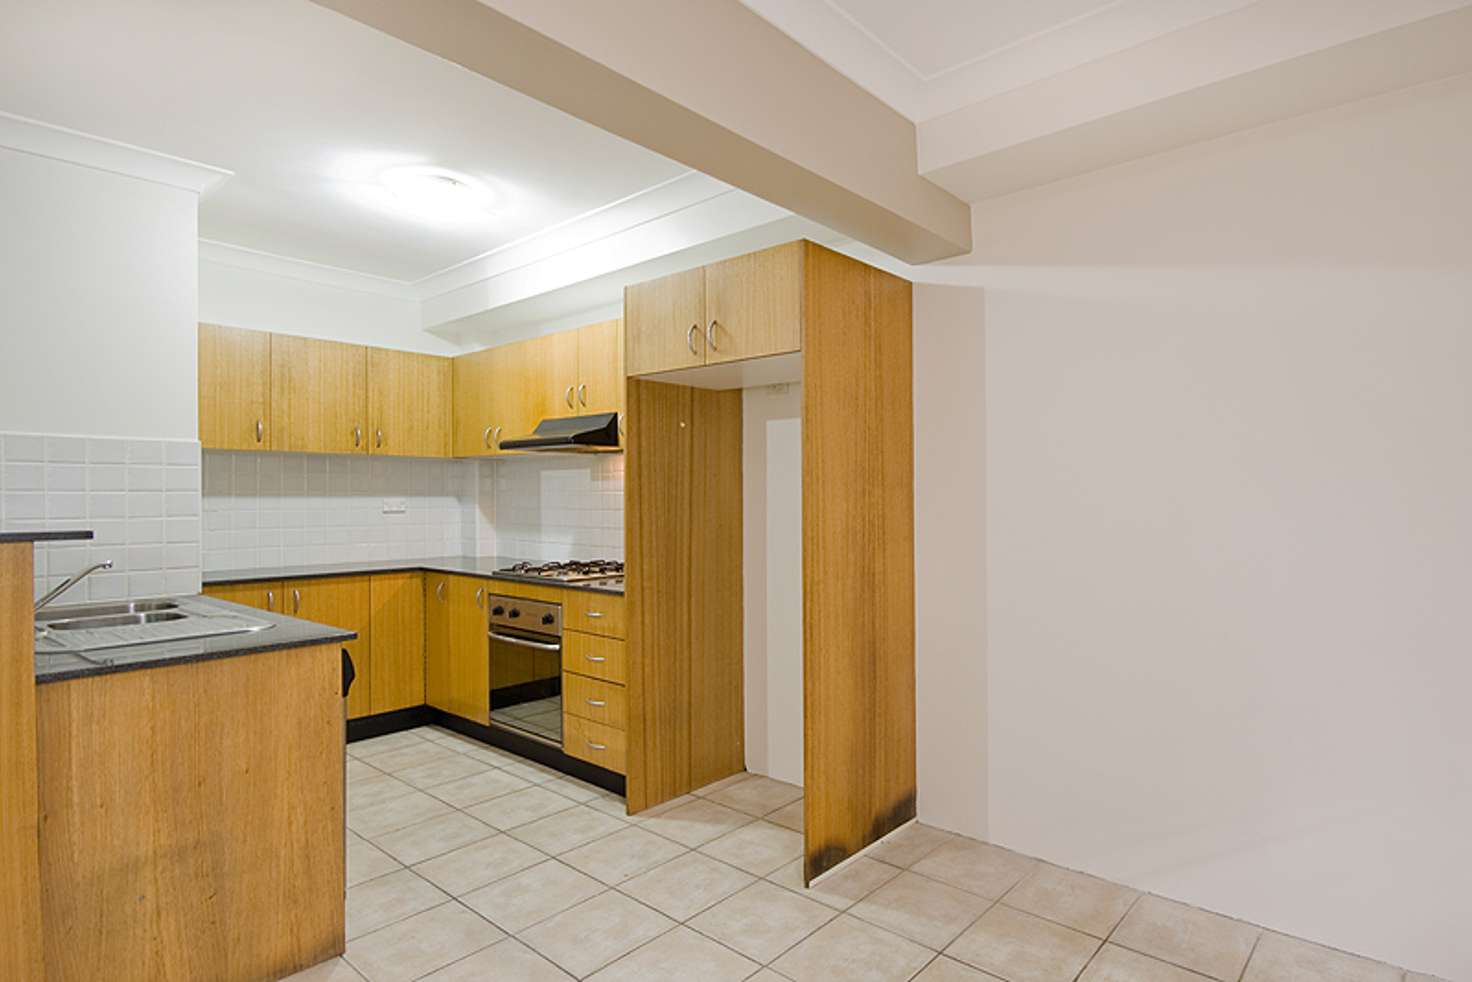 Main view of Homely apartment listing, 11-17 Wyndham St, Alexandria NSW 2015